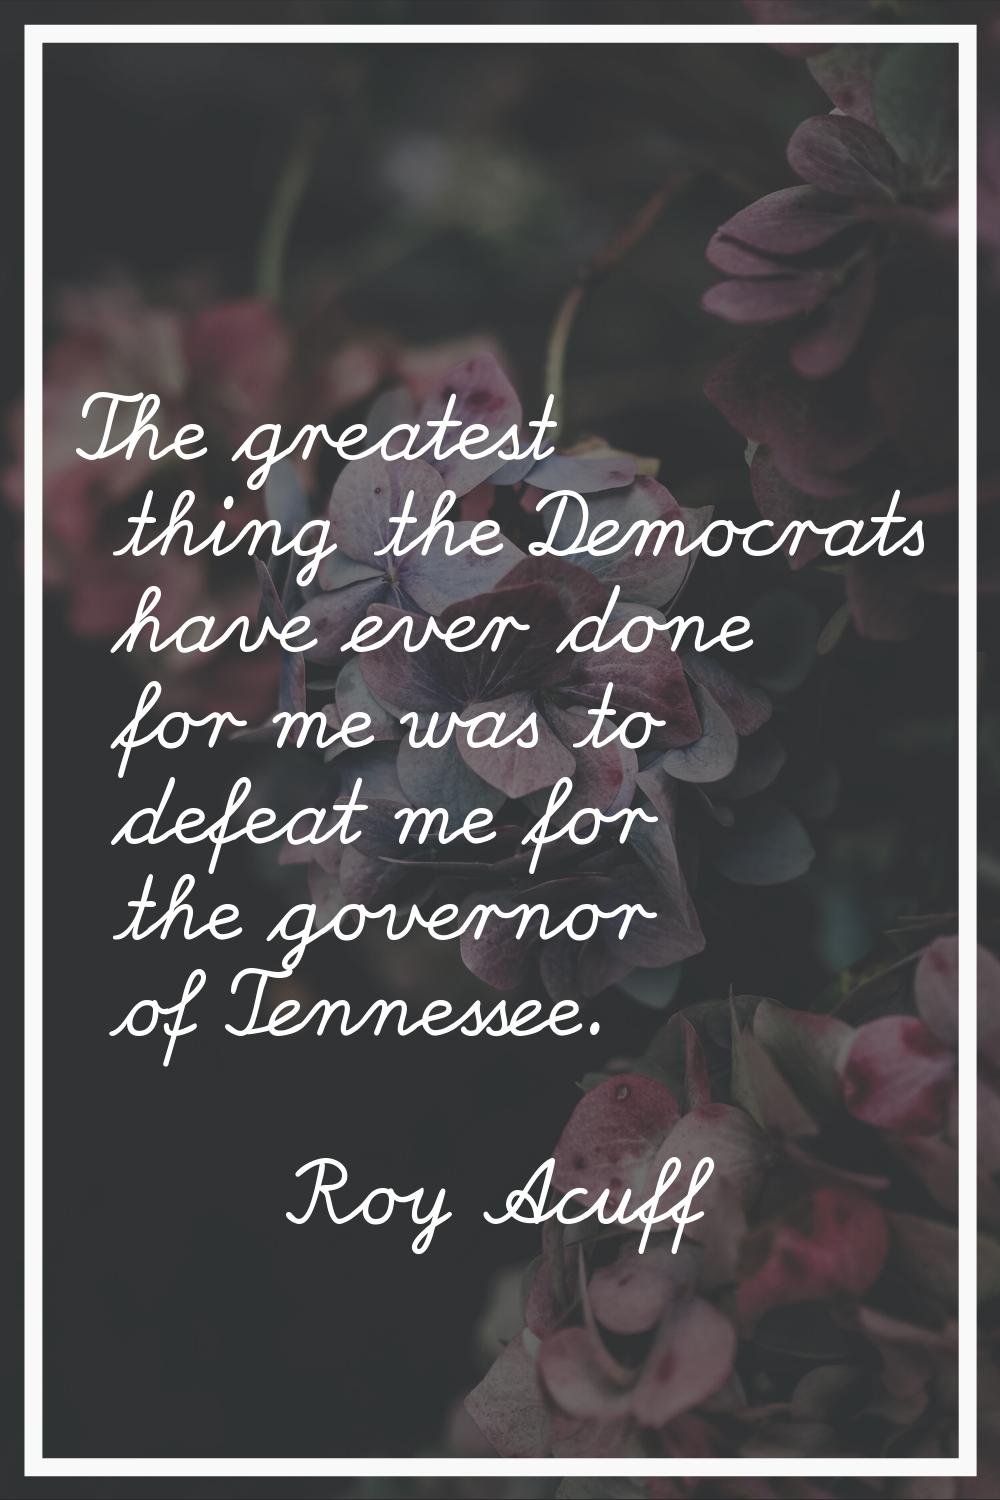 The greatest thing the Democrats have ever done for me was to defeat me for the governor of Tenness